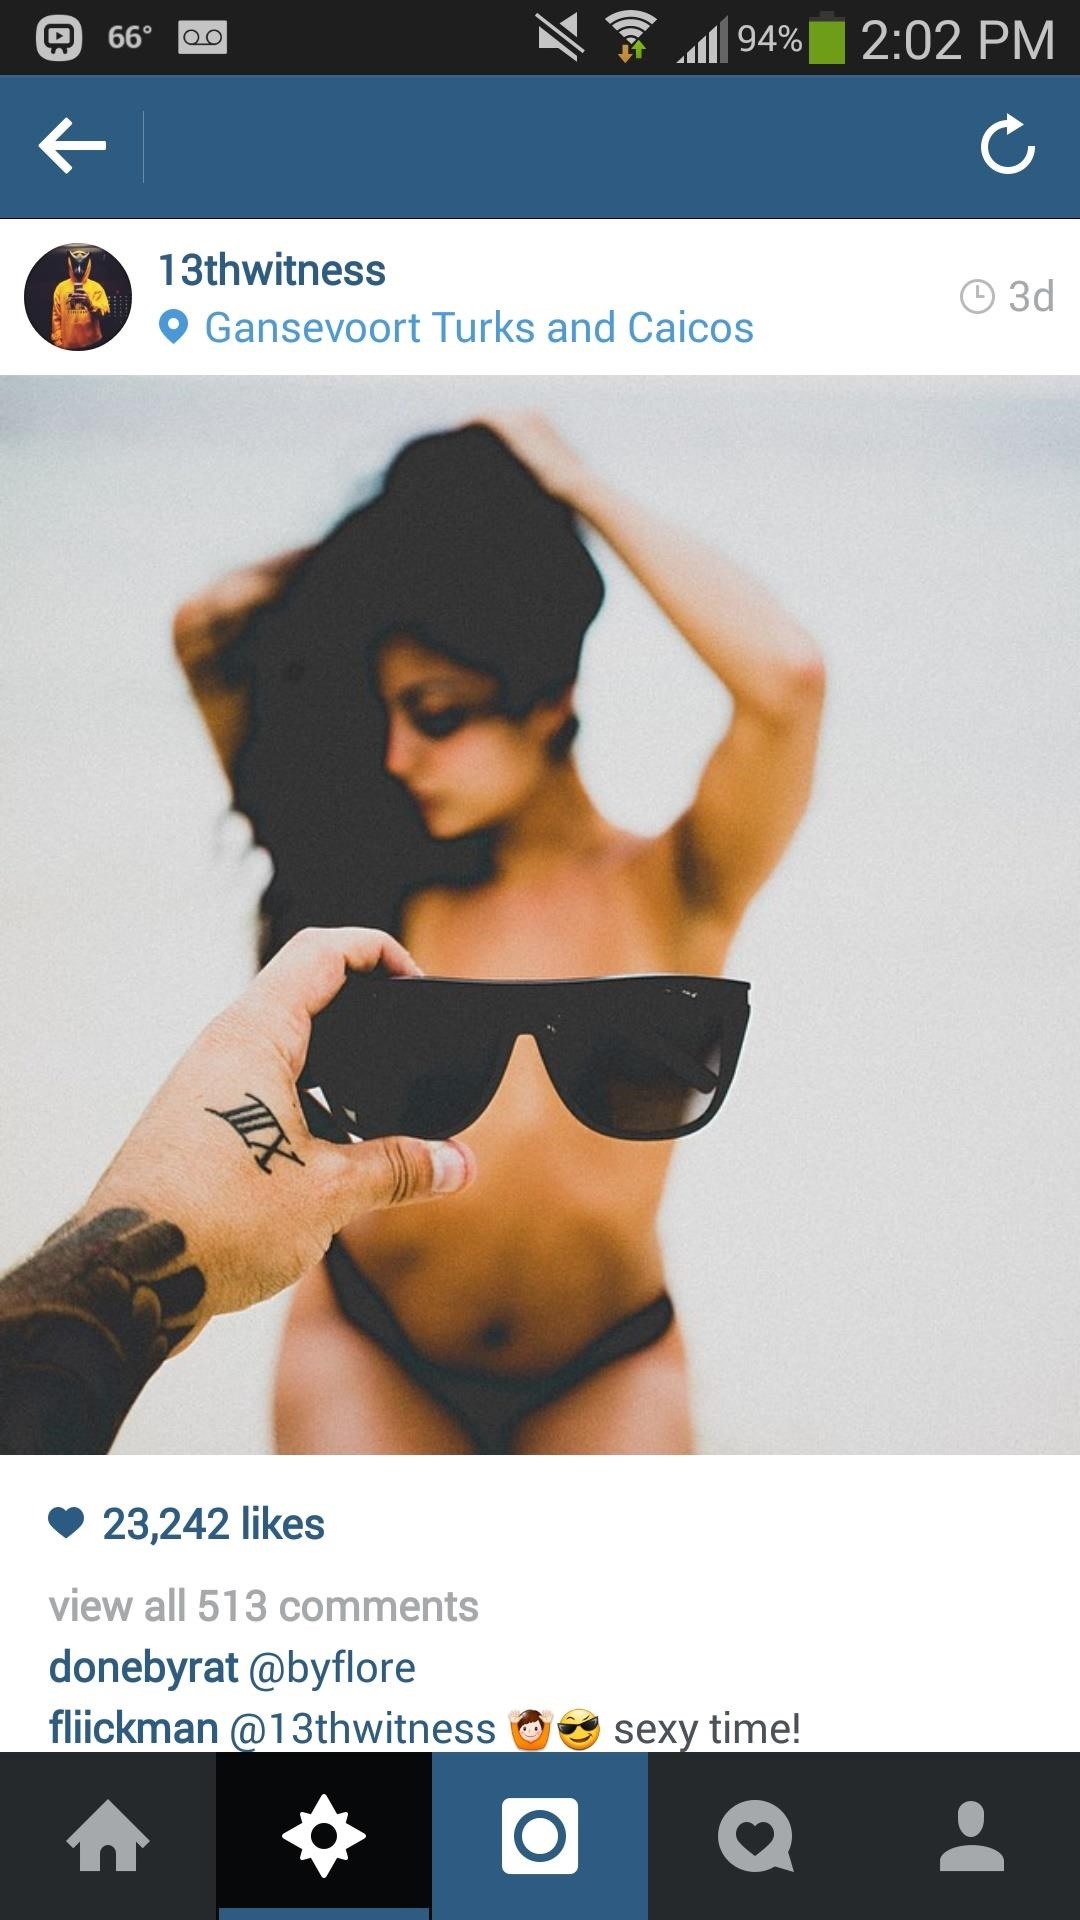 You Can Easily Hack Instagram for a Crazy Amount of Likes (But You Totally Shouldn't)